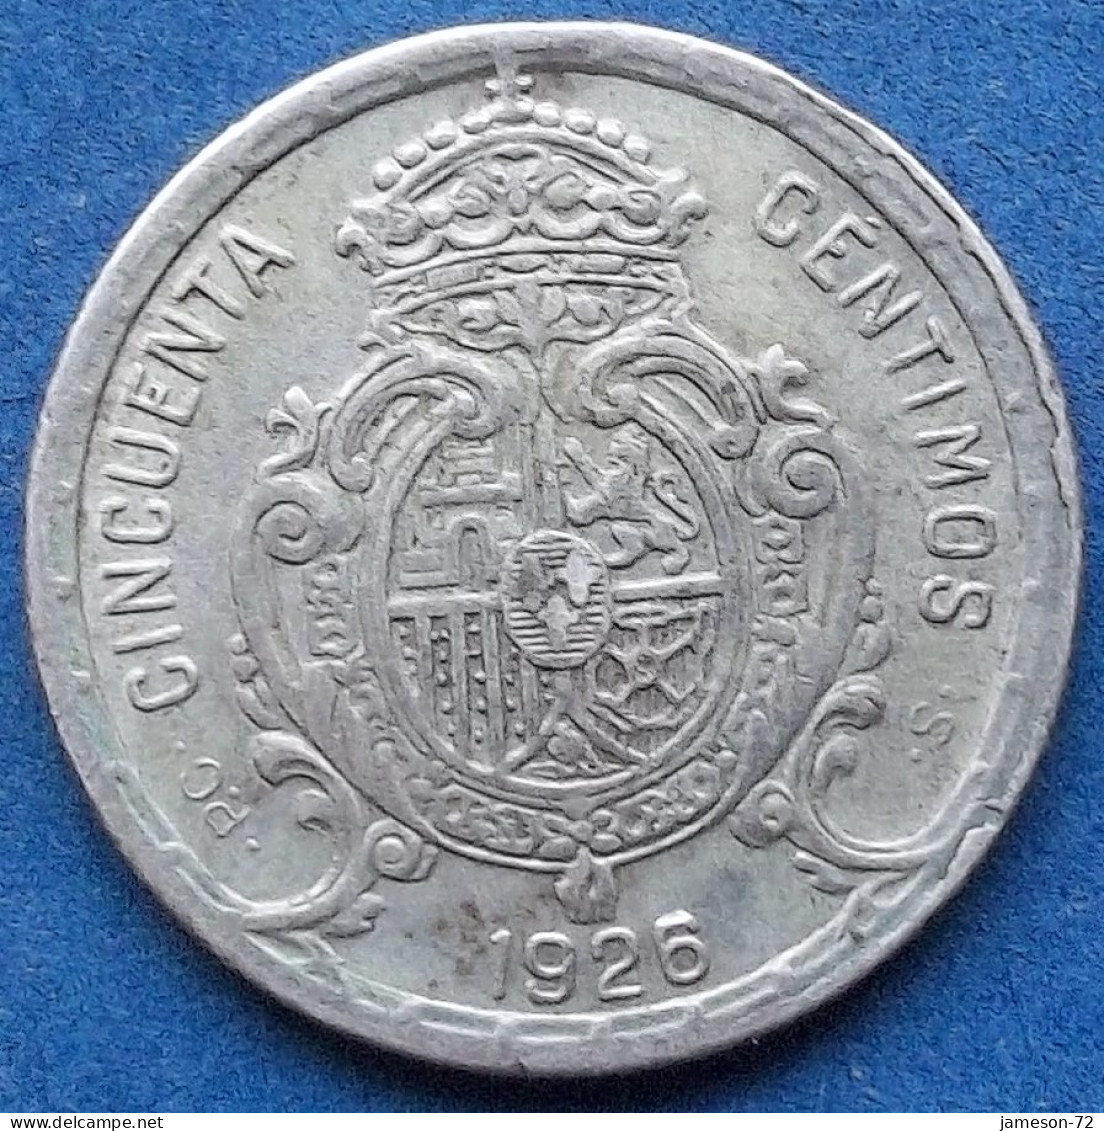 SPAIN - Silver 50 Centimos 1926 PC S KM# 741 Alfonso XIII (1886-1931) - Edelweiss Coins - Premières Frappes